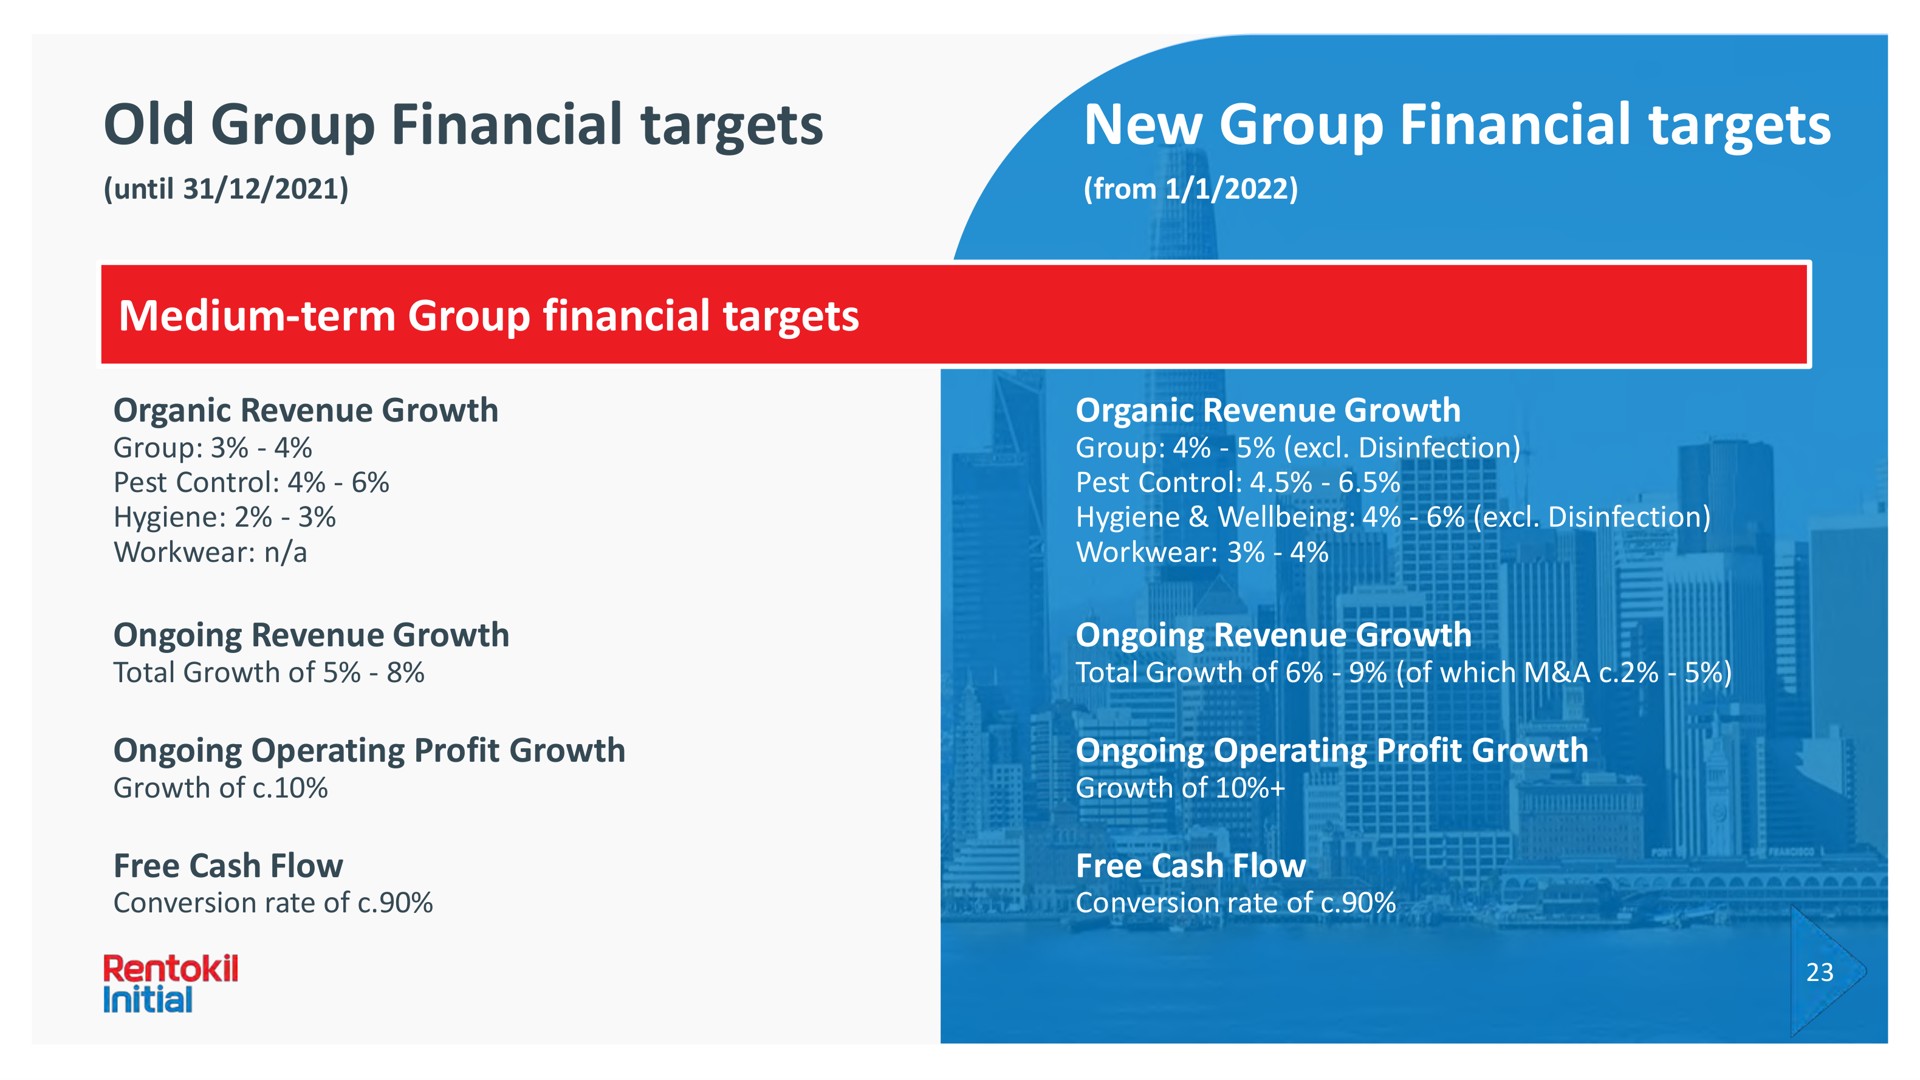 old group financial targets new group financial targets medium term group financial targets organic revenue growth ongoing revenue growth organic revenue growth ongoing revenue growth ongoing operating profit growth ongoing operating profit growth free cash flow free cash flow | Rentokil Initial